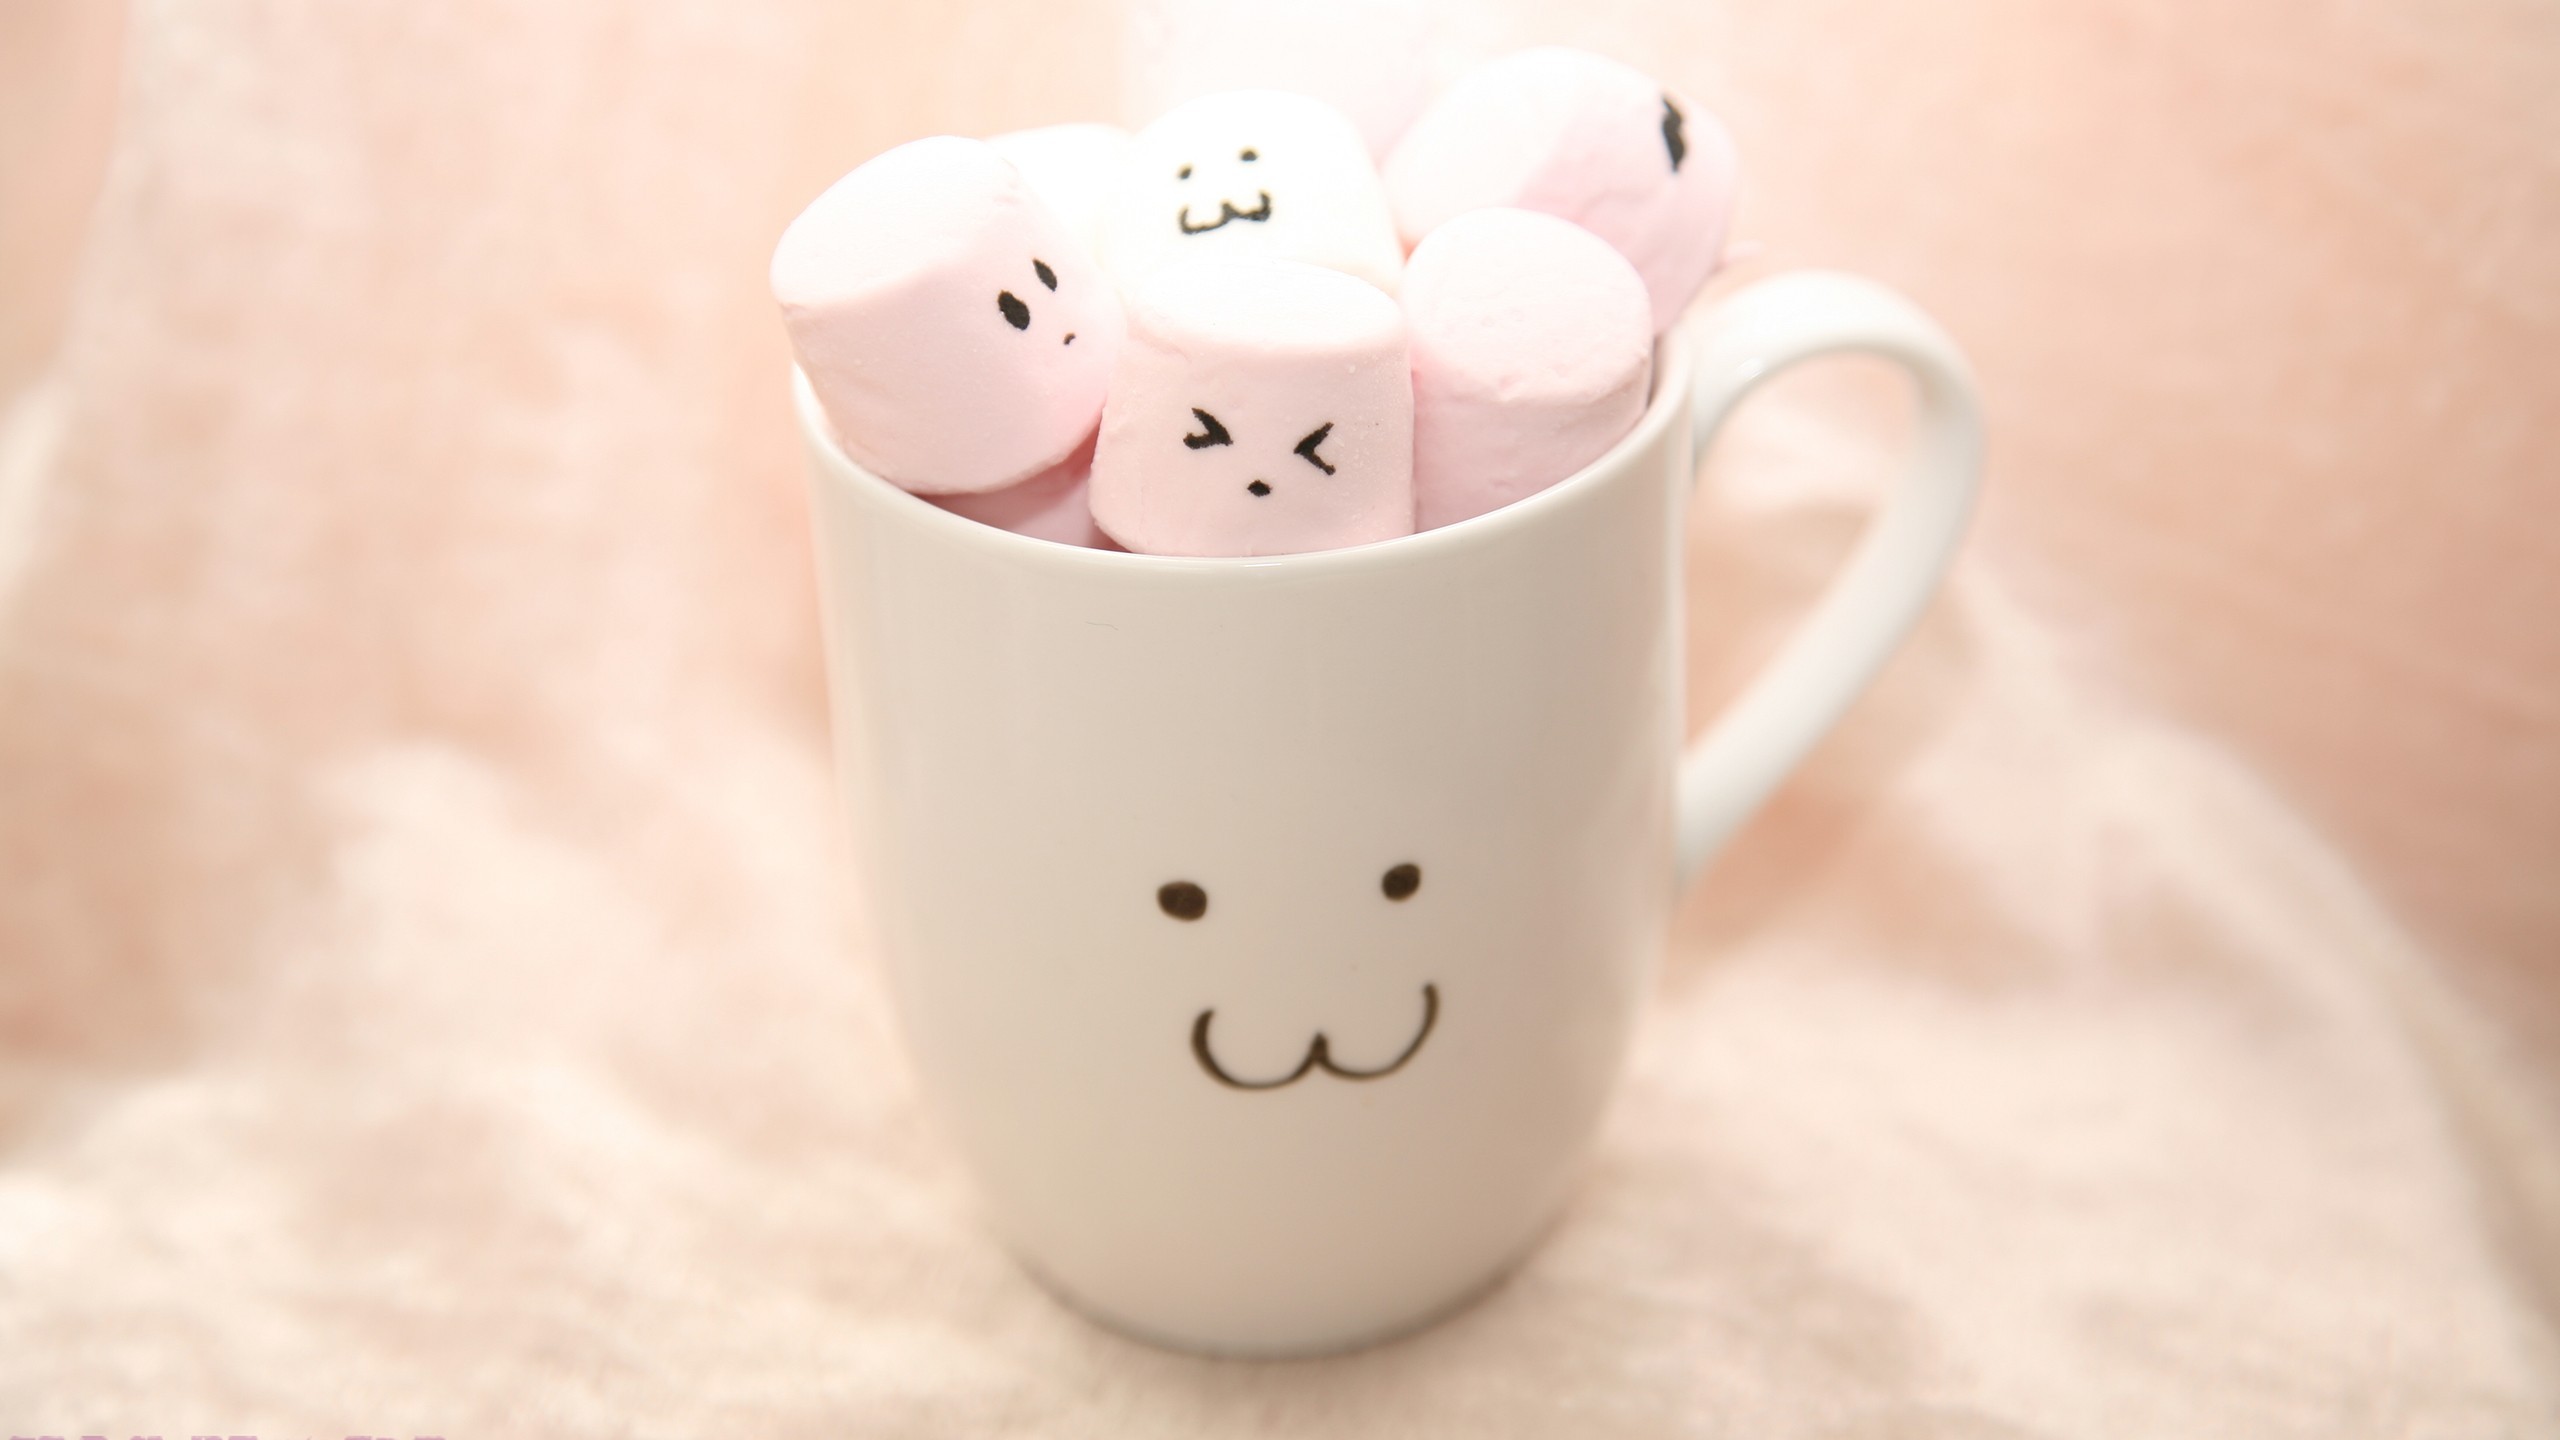 General 2560x1440 macro marshmallows cup food sweets